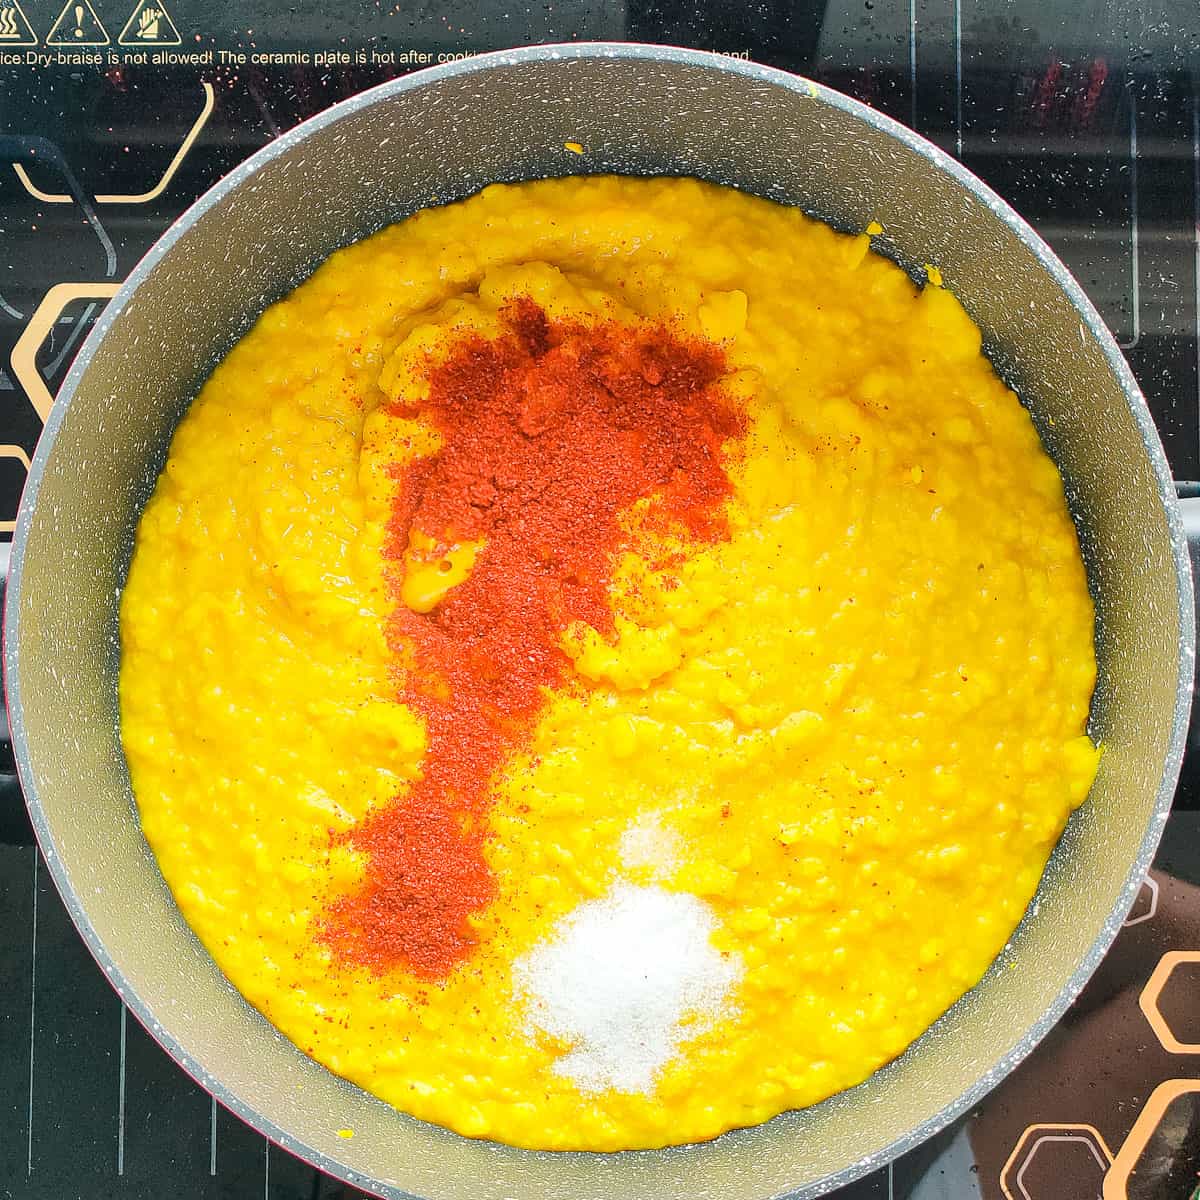 Cooked mung dal with chili powder and salt in a cooking pot.